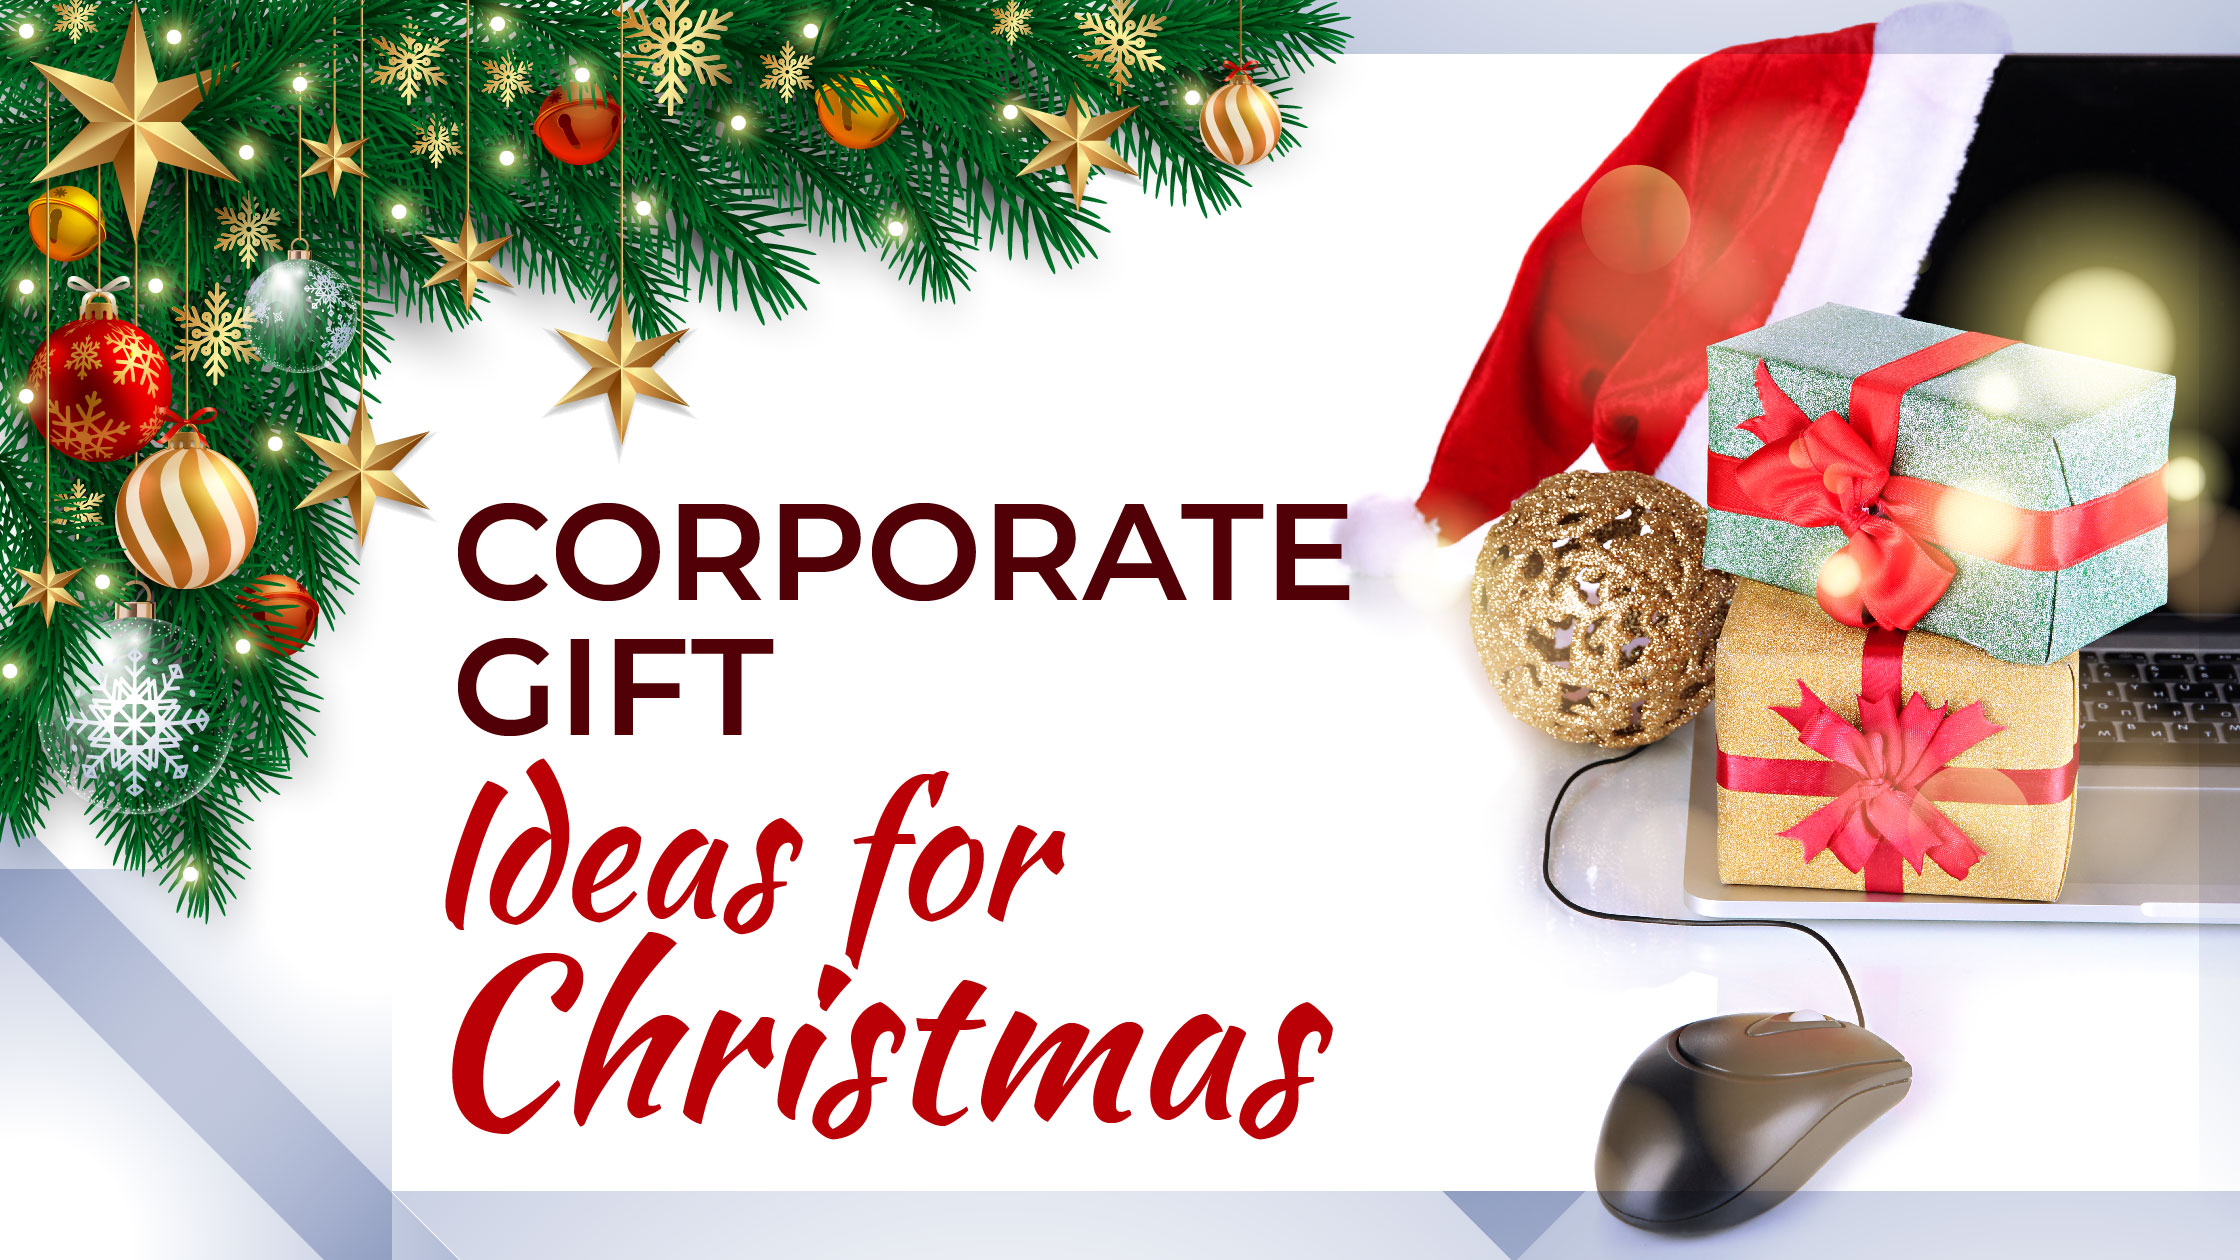 Finding Christmas Corporate Gifts for Clients & Employees?